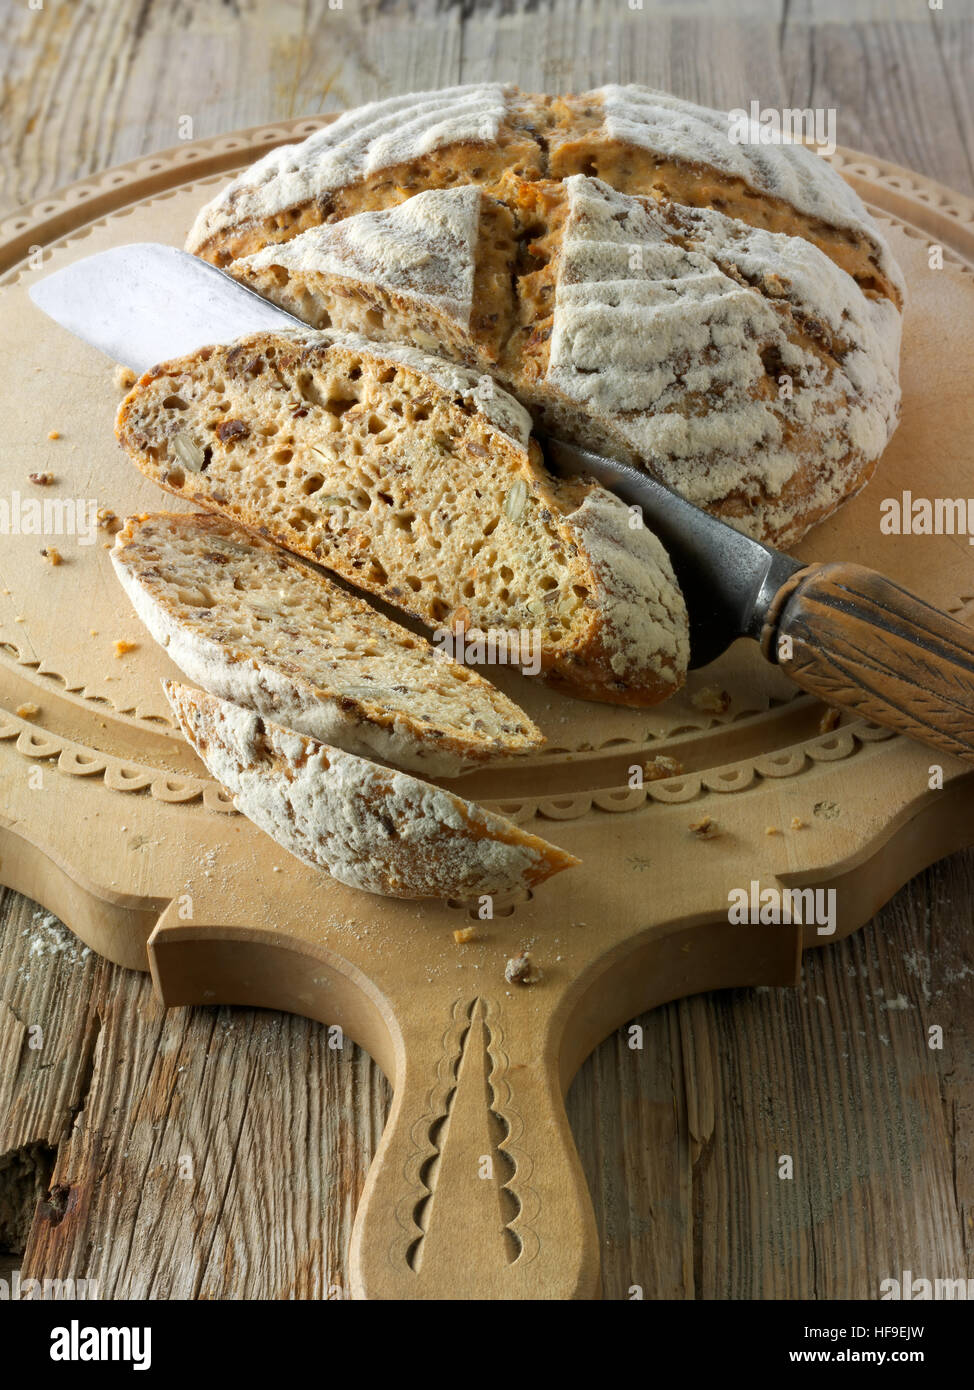 Artisan sour dough wholemeal seed bread with white, malted rye flour Stock Photo